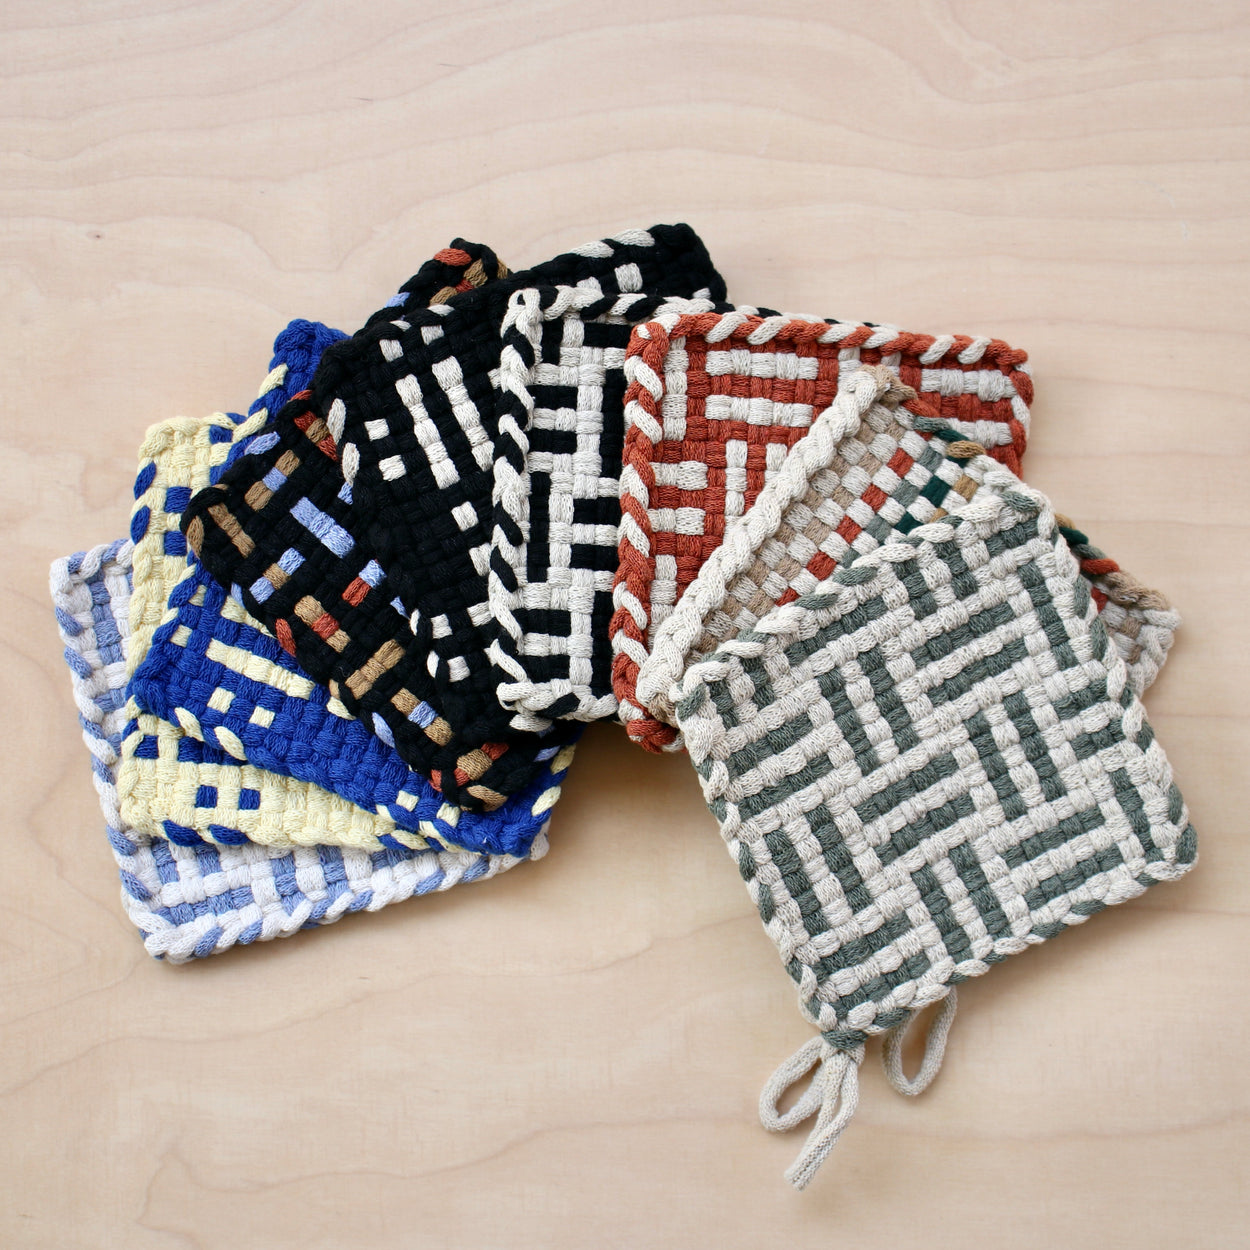 Group of Kate Kilmurray handwoven pot holders fanned out on pale wood background